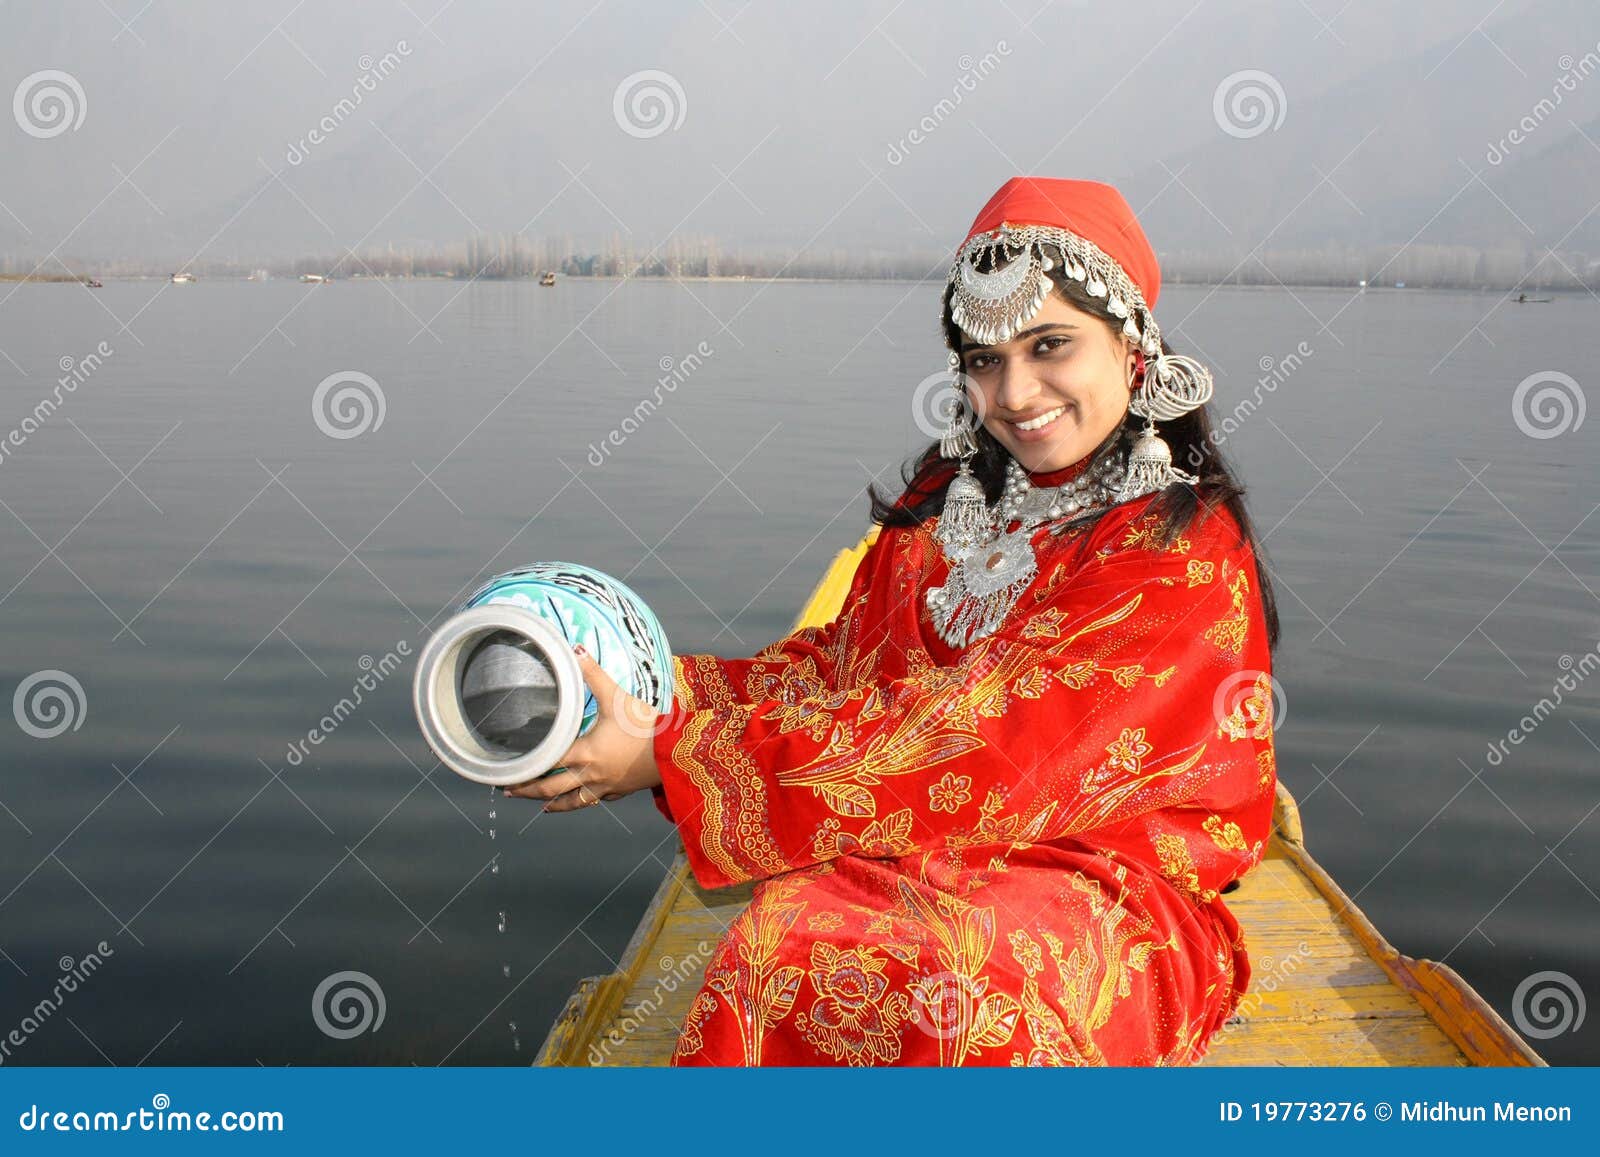 young kashmir girl collecting water from dal lake